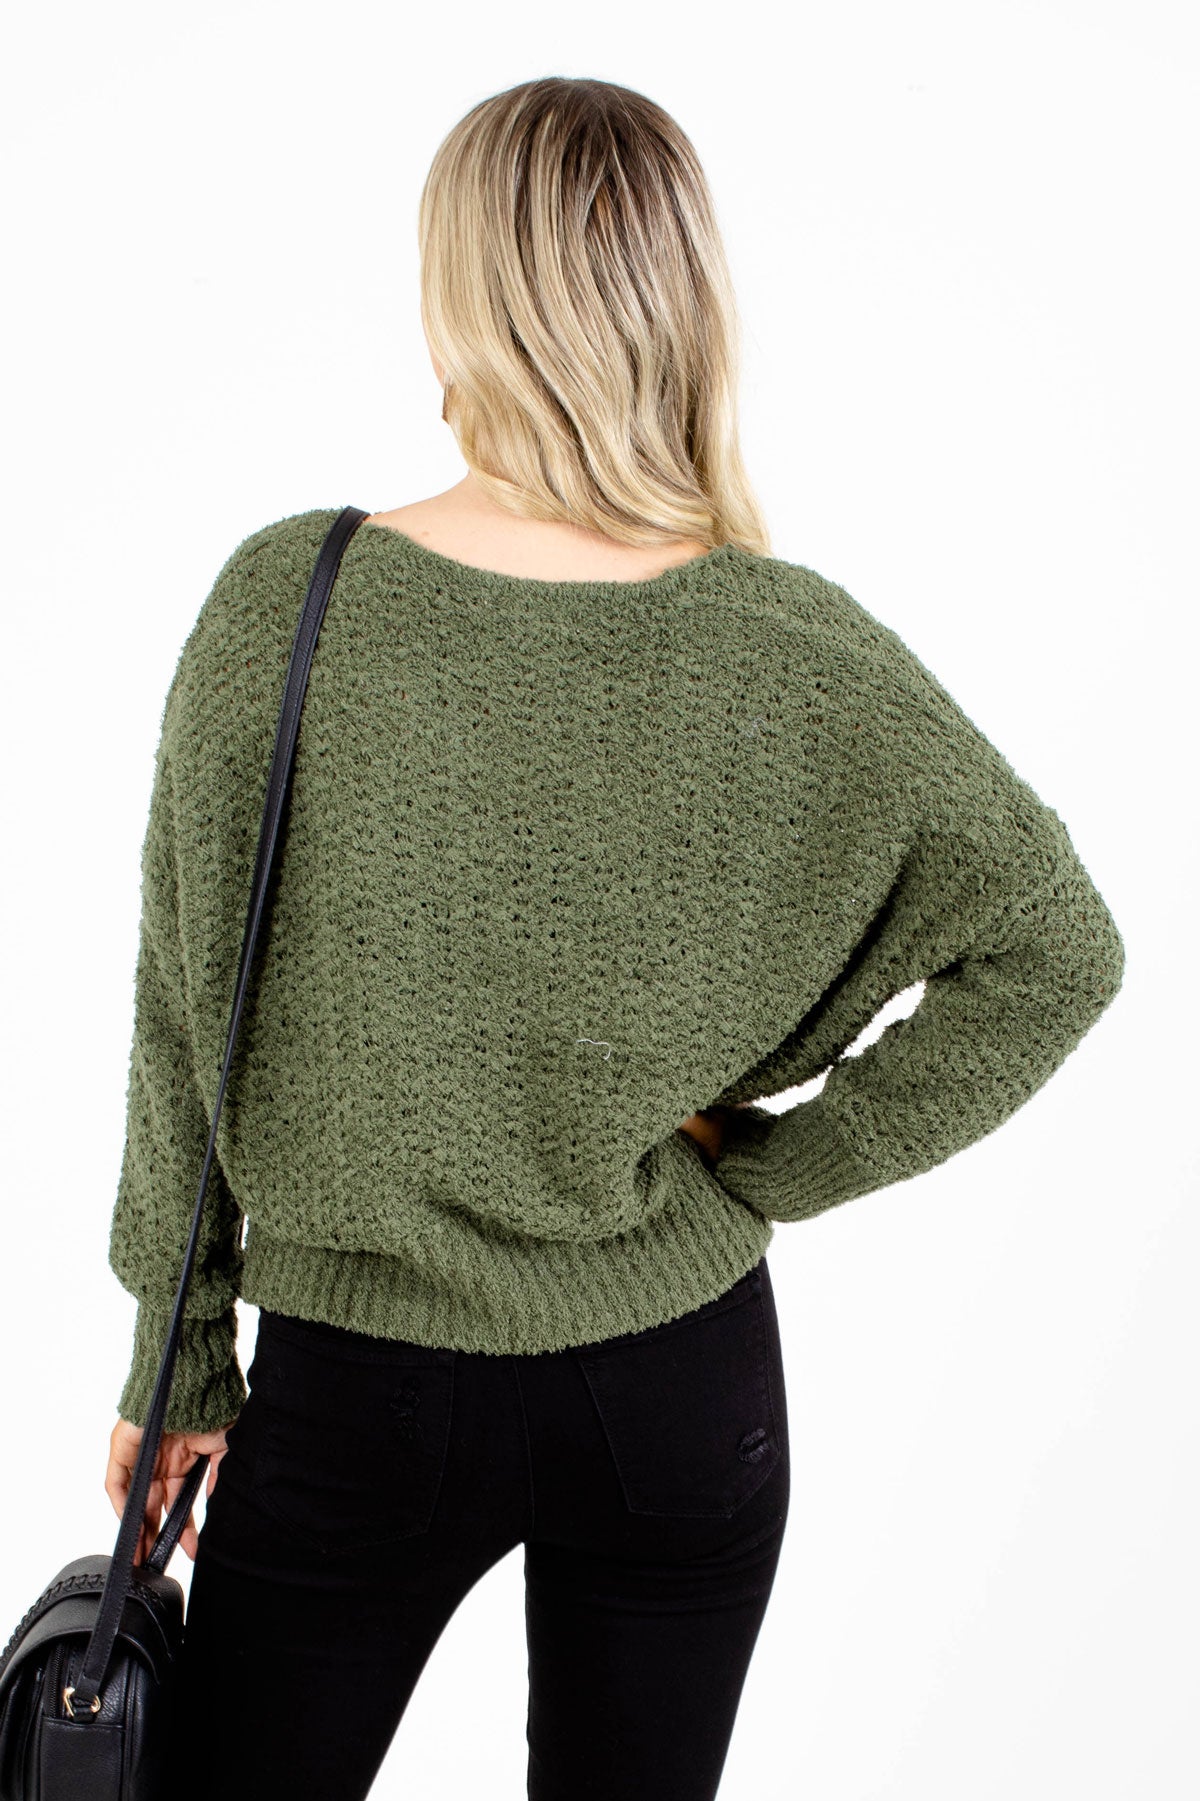 Stretchy Comfortable Green Sweater Boutique Styles